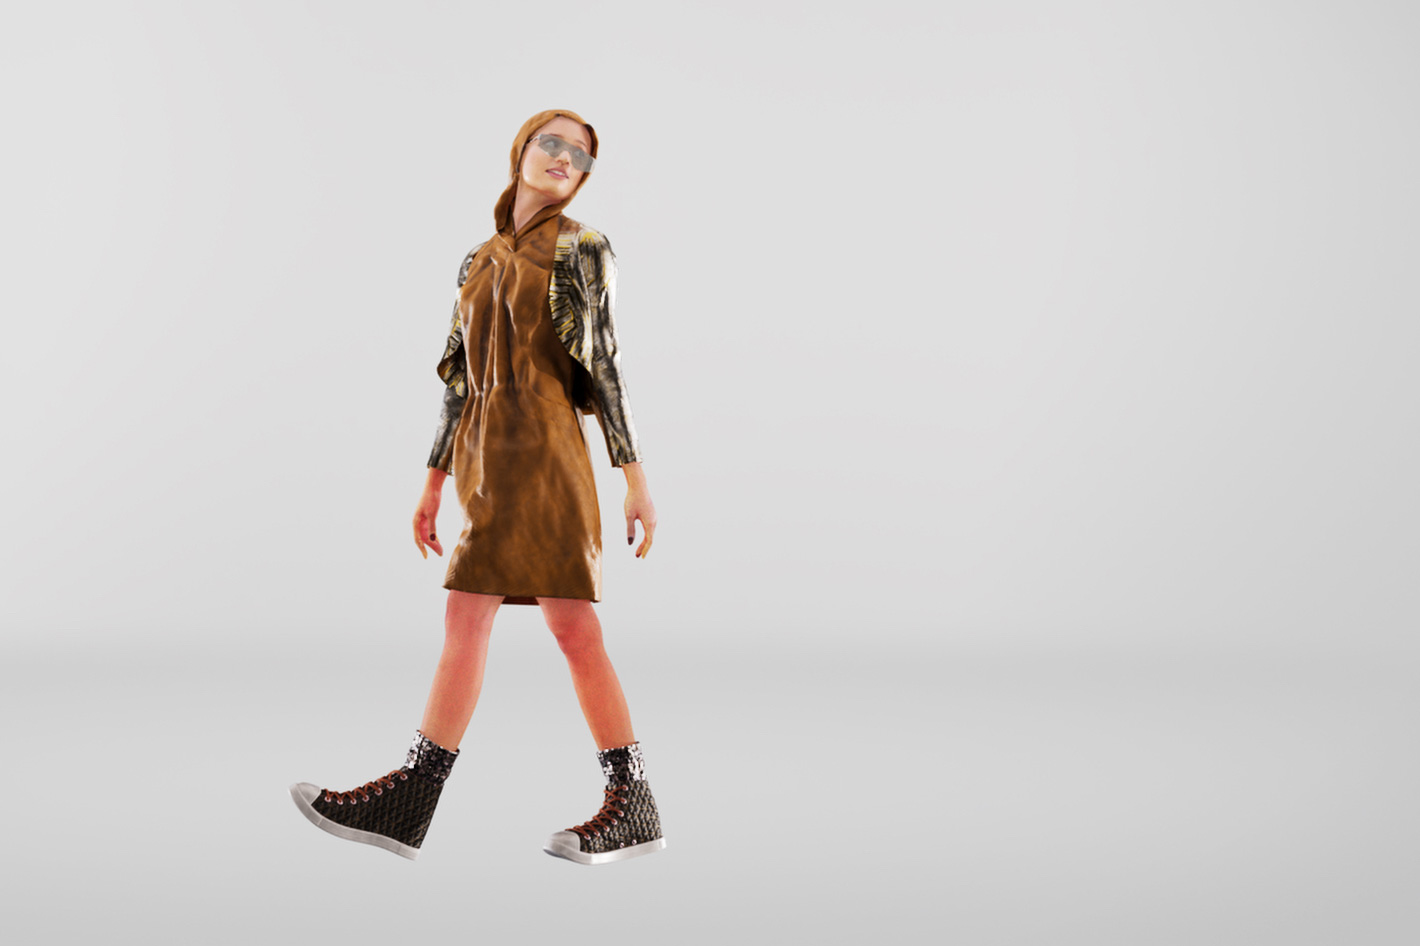 Wild Capture’s technology delivers digital humans for fashion